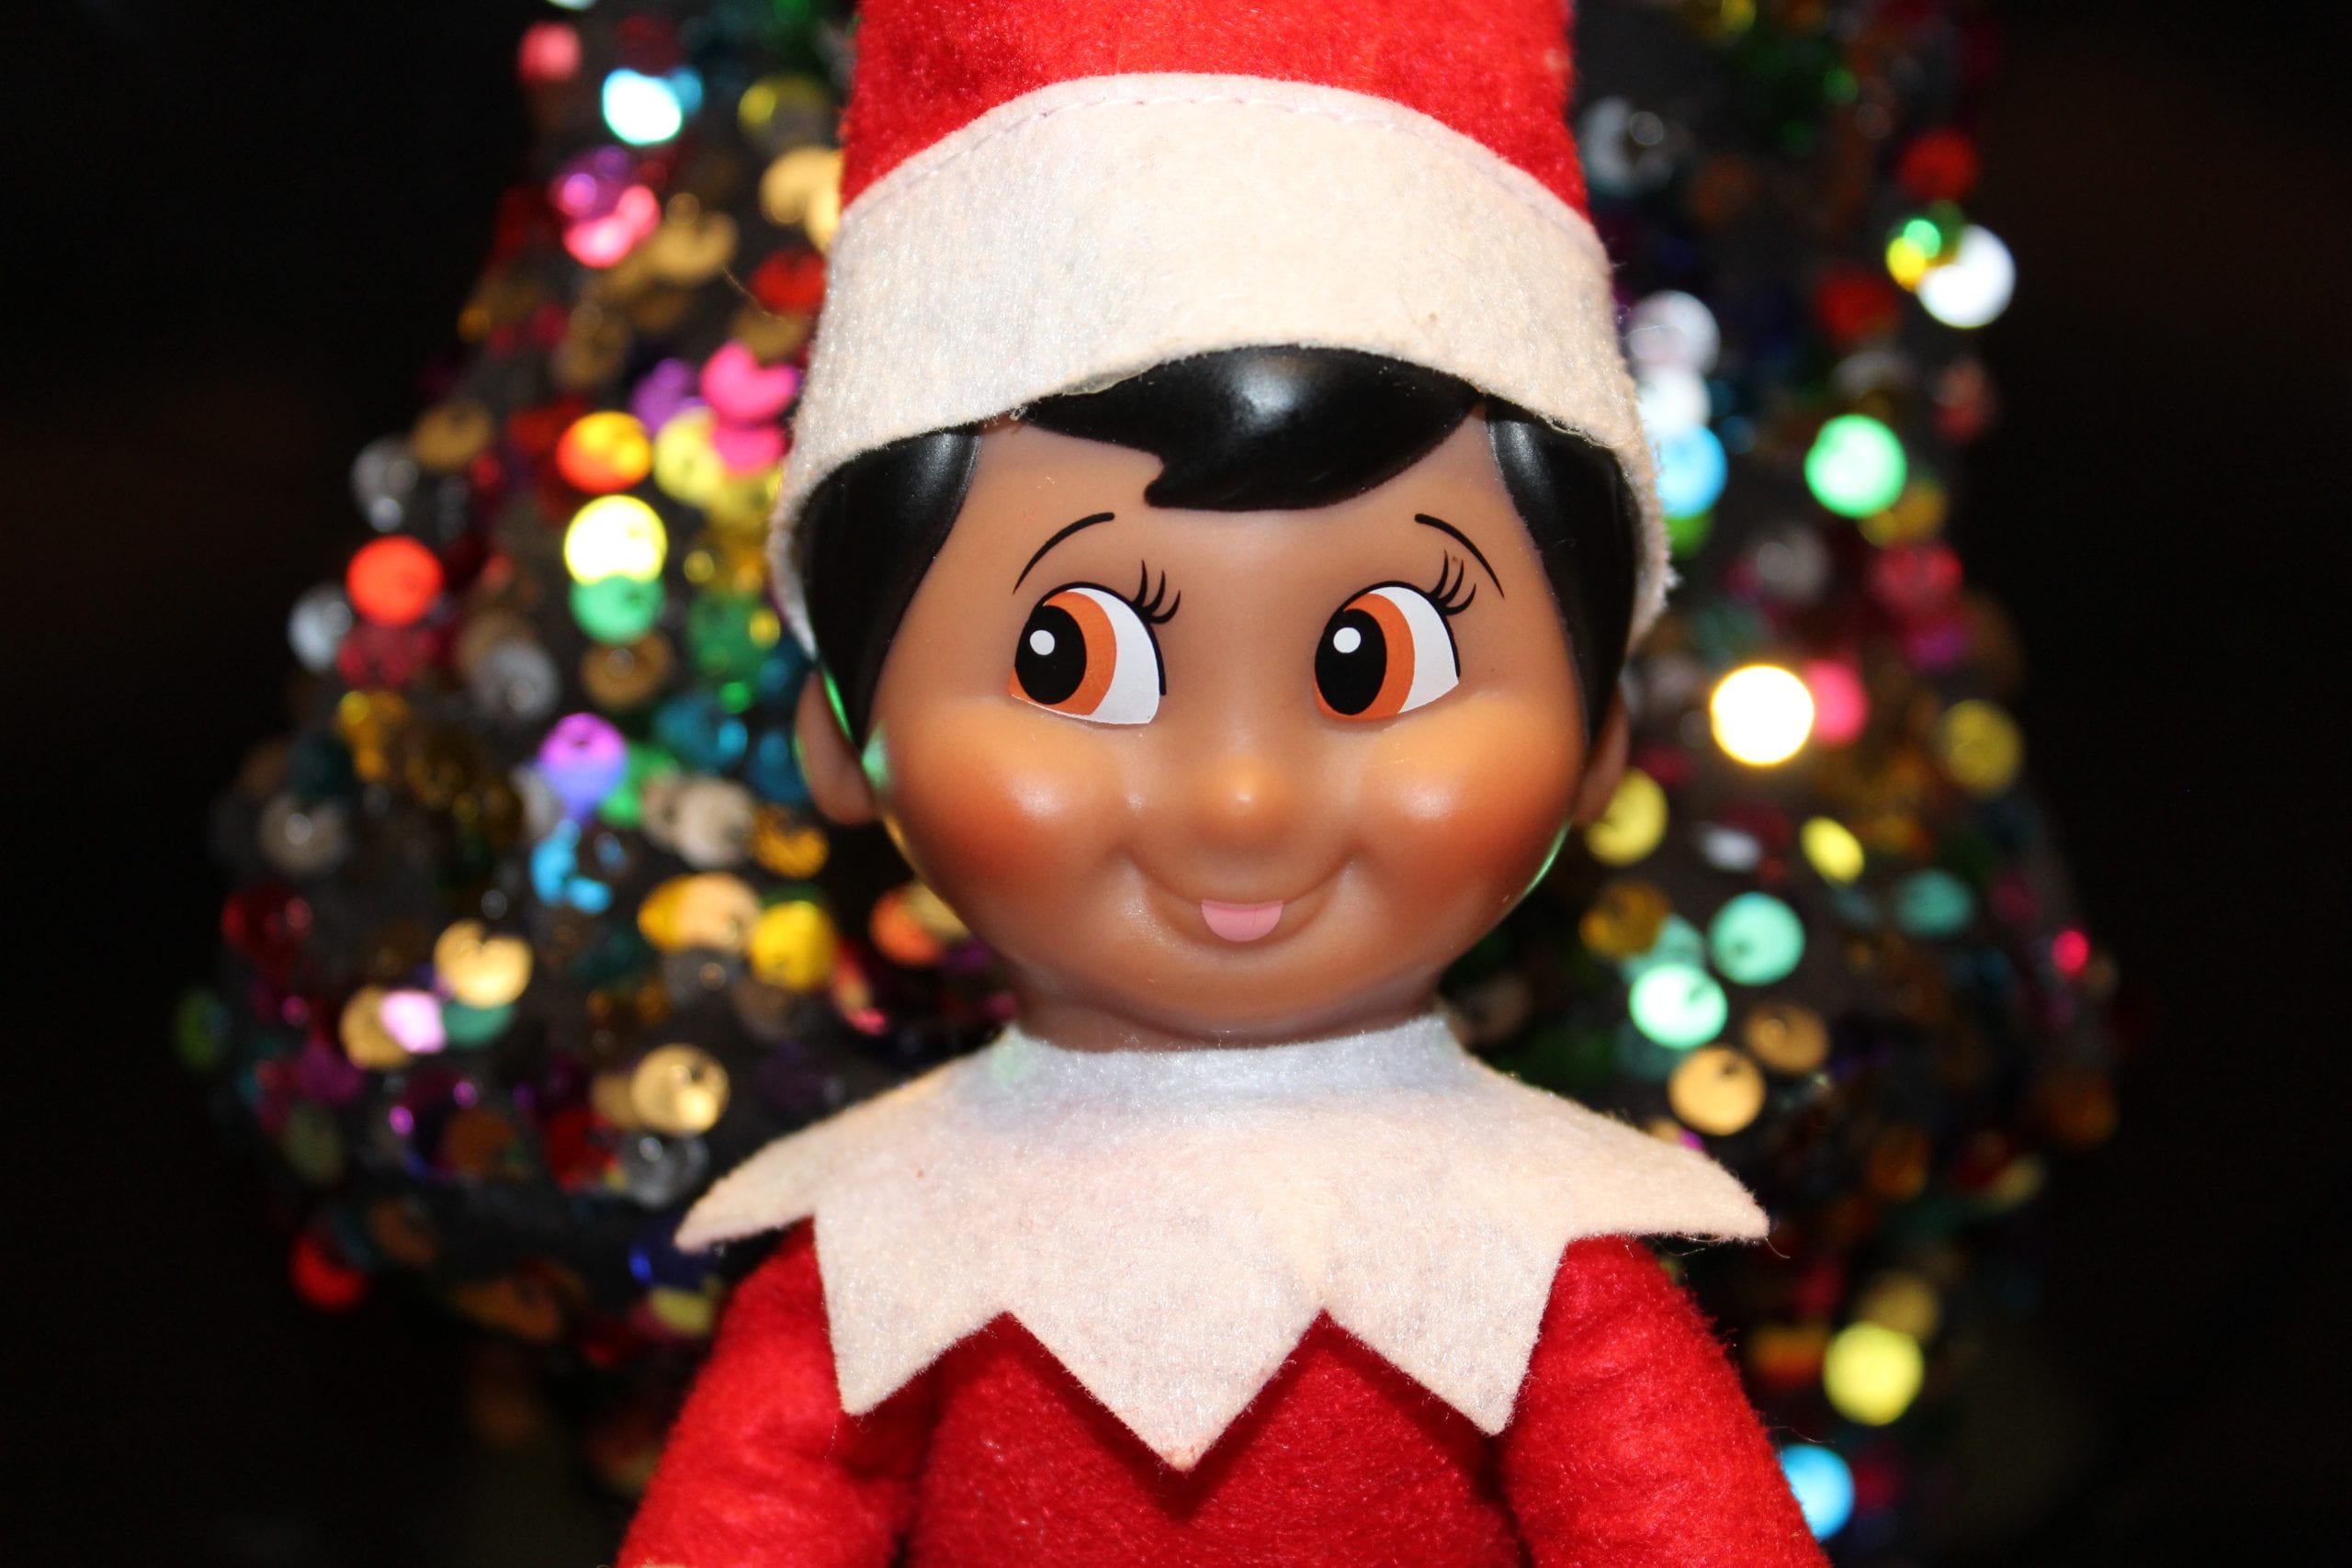 Elf on the shelf sitting in front of a Christmas tree.